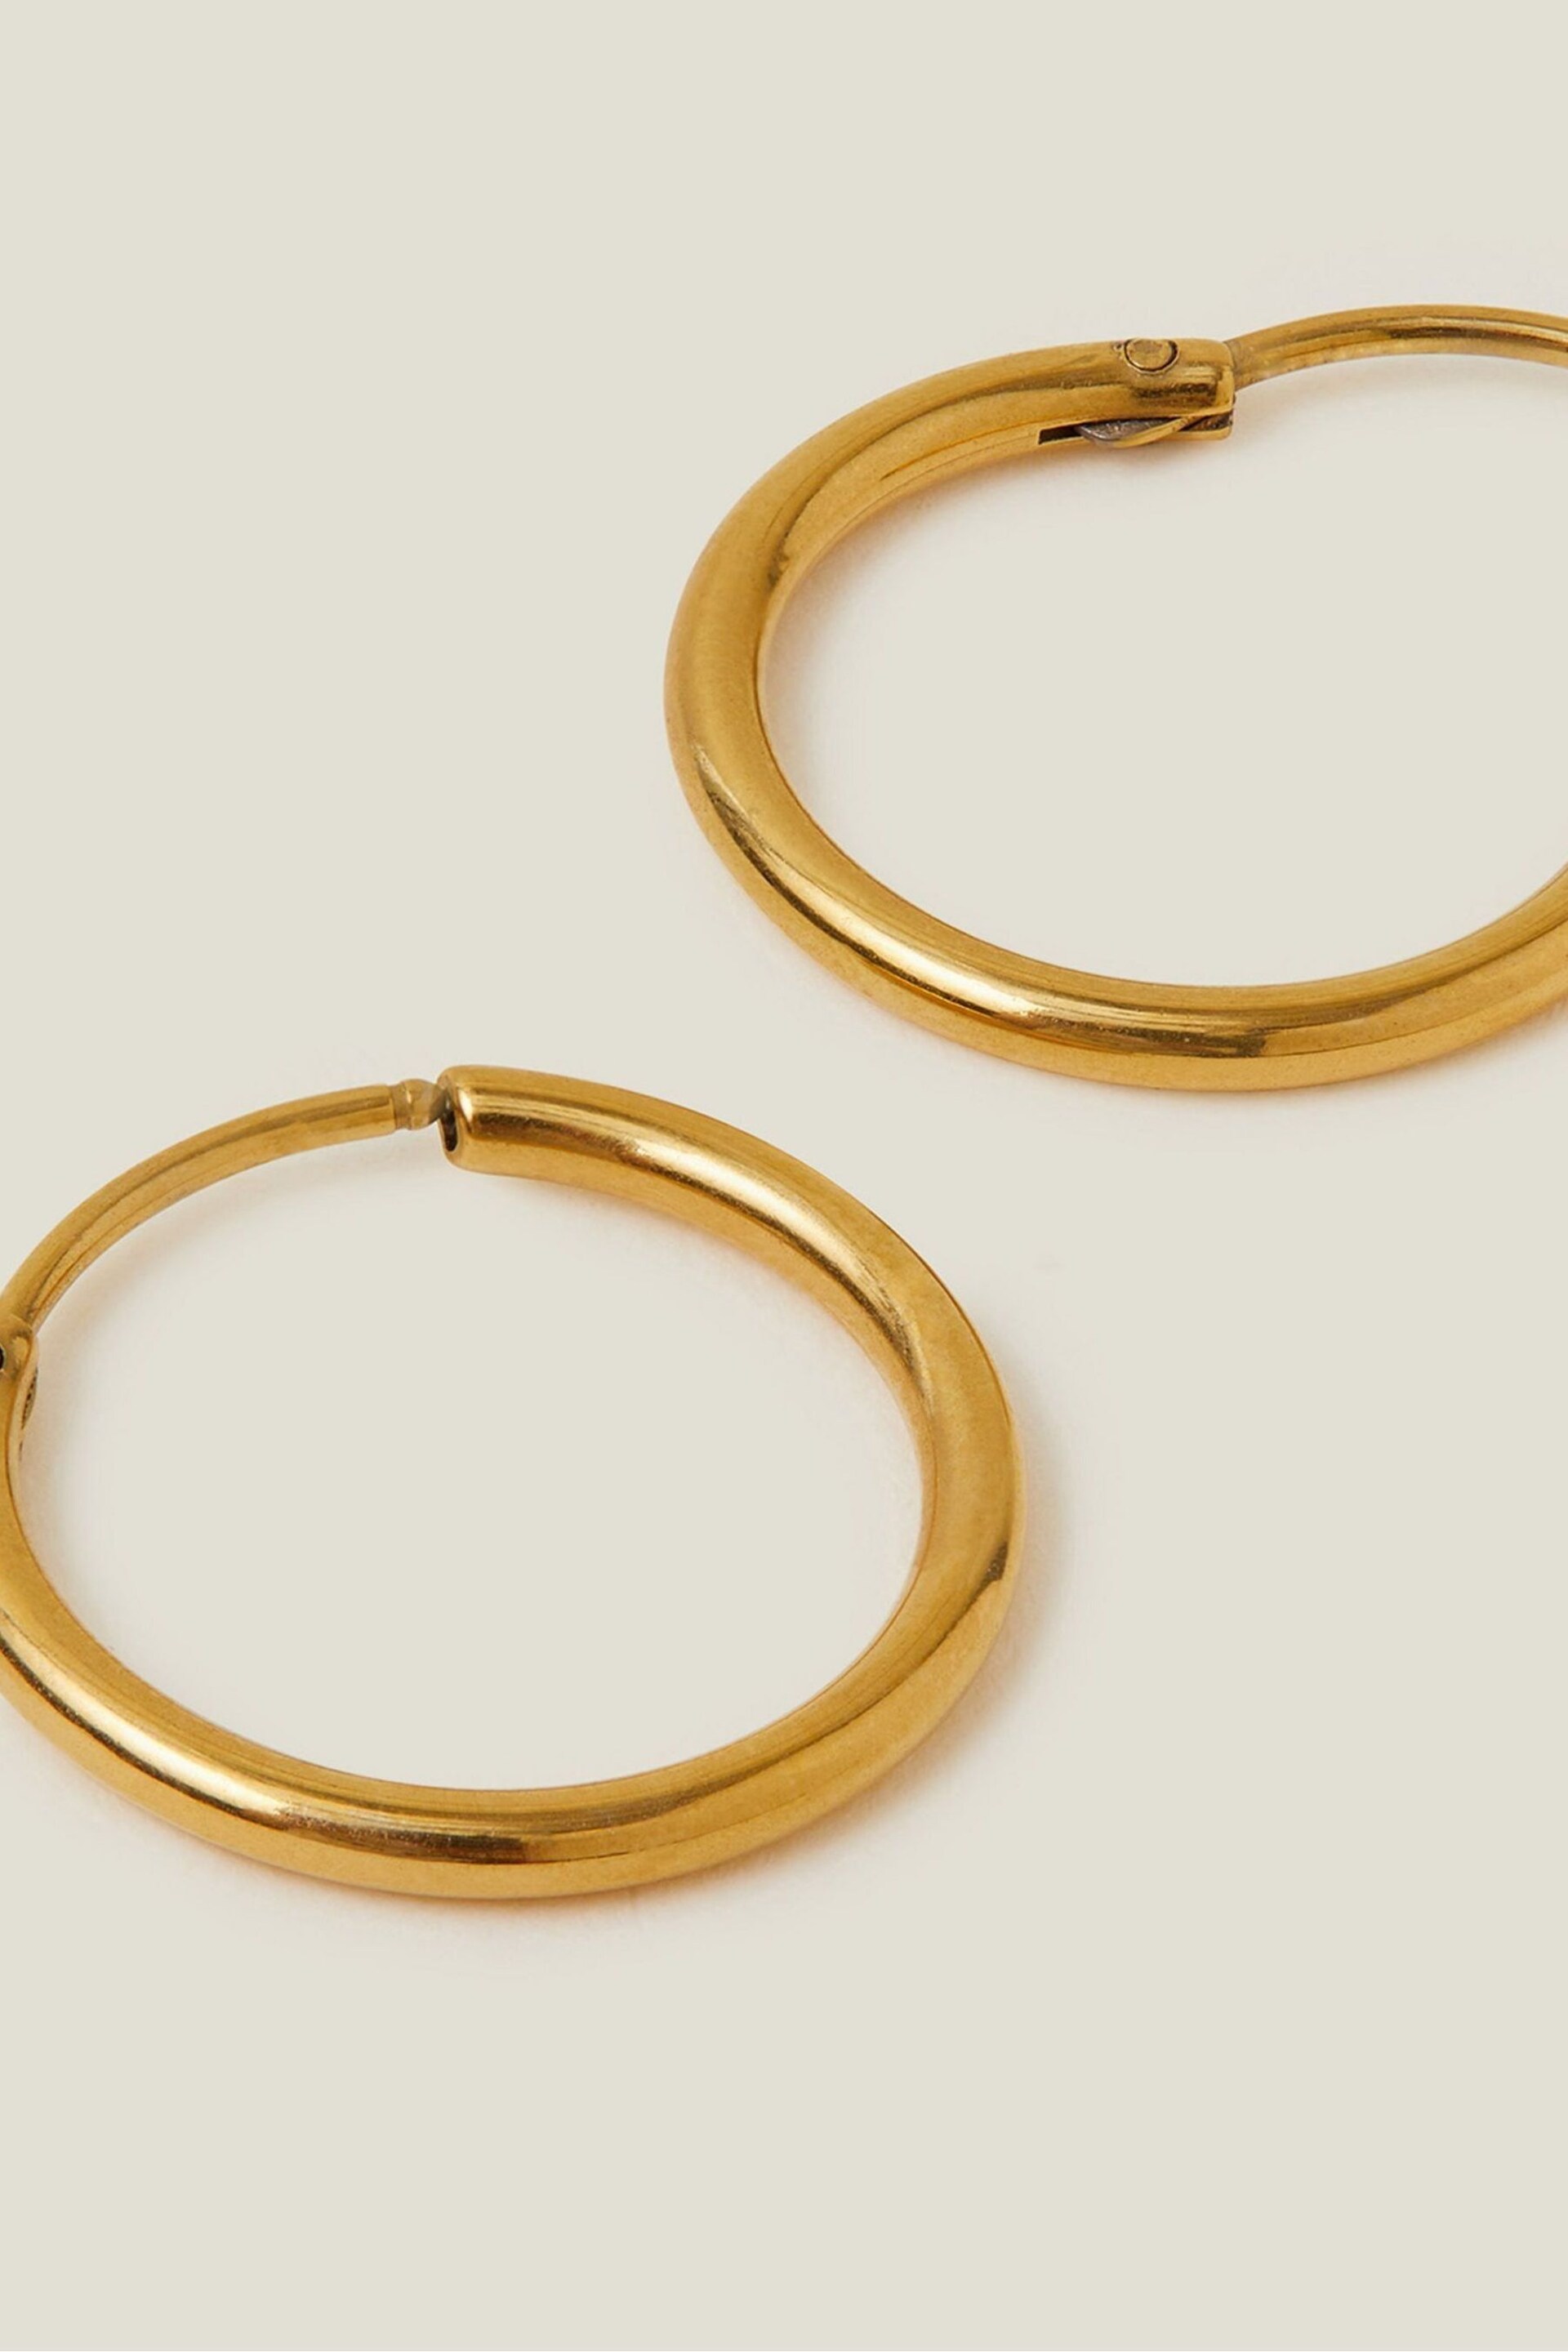 Accessorize Gold Tone Stainless Steel Medium Hoops - Image 1 of 3